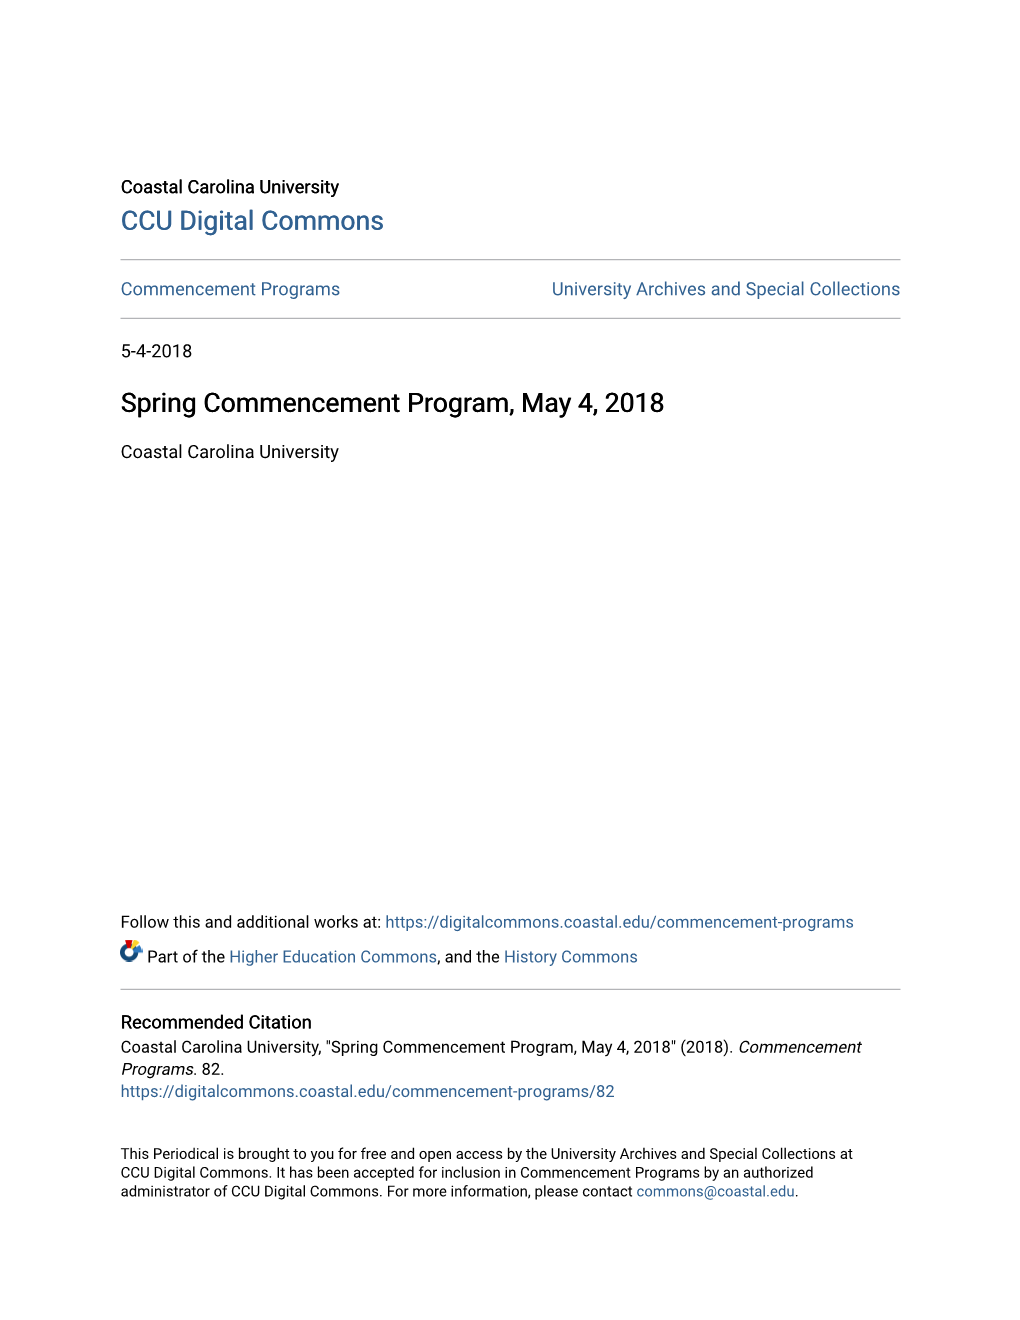 Spring Commencement Program, May 4, 2018